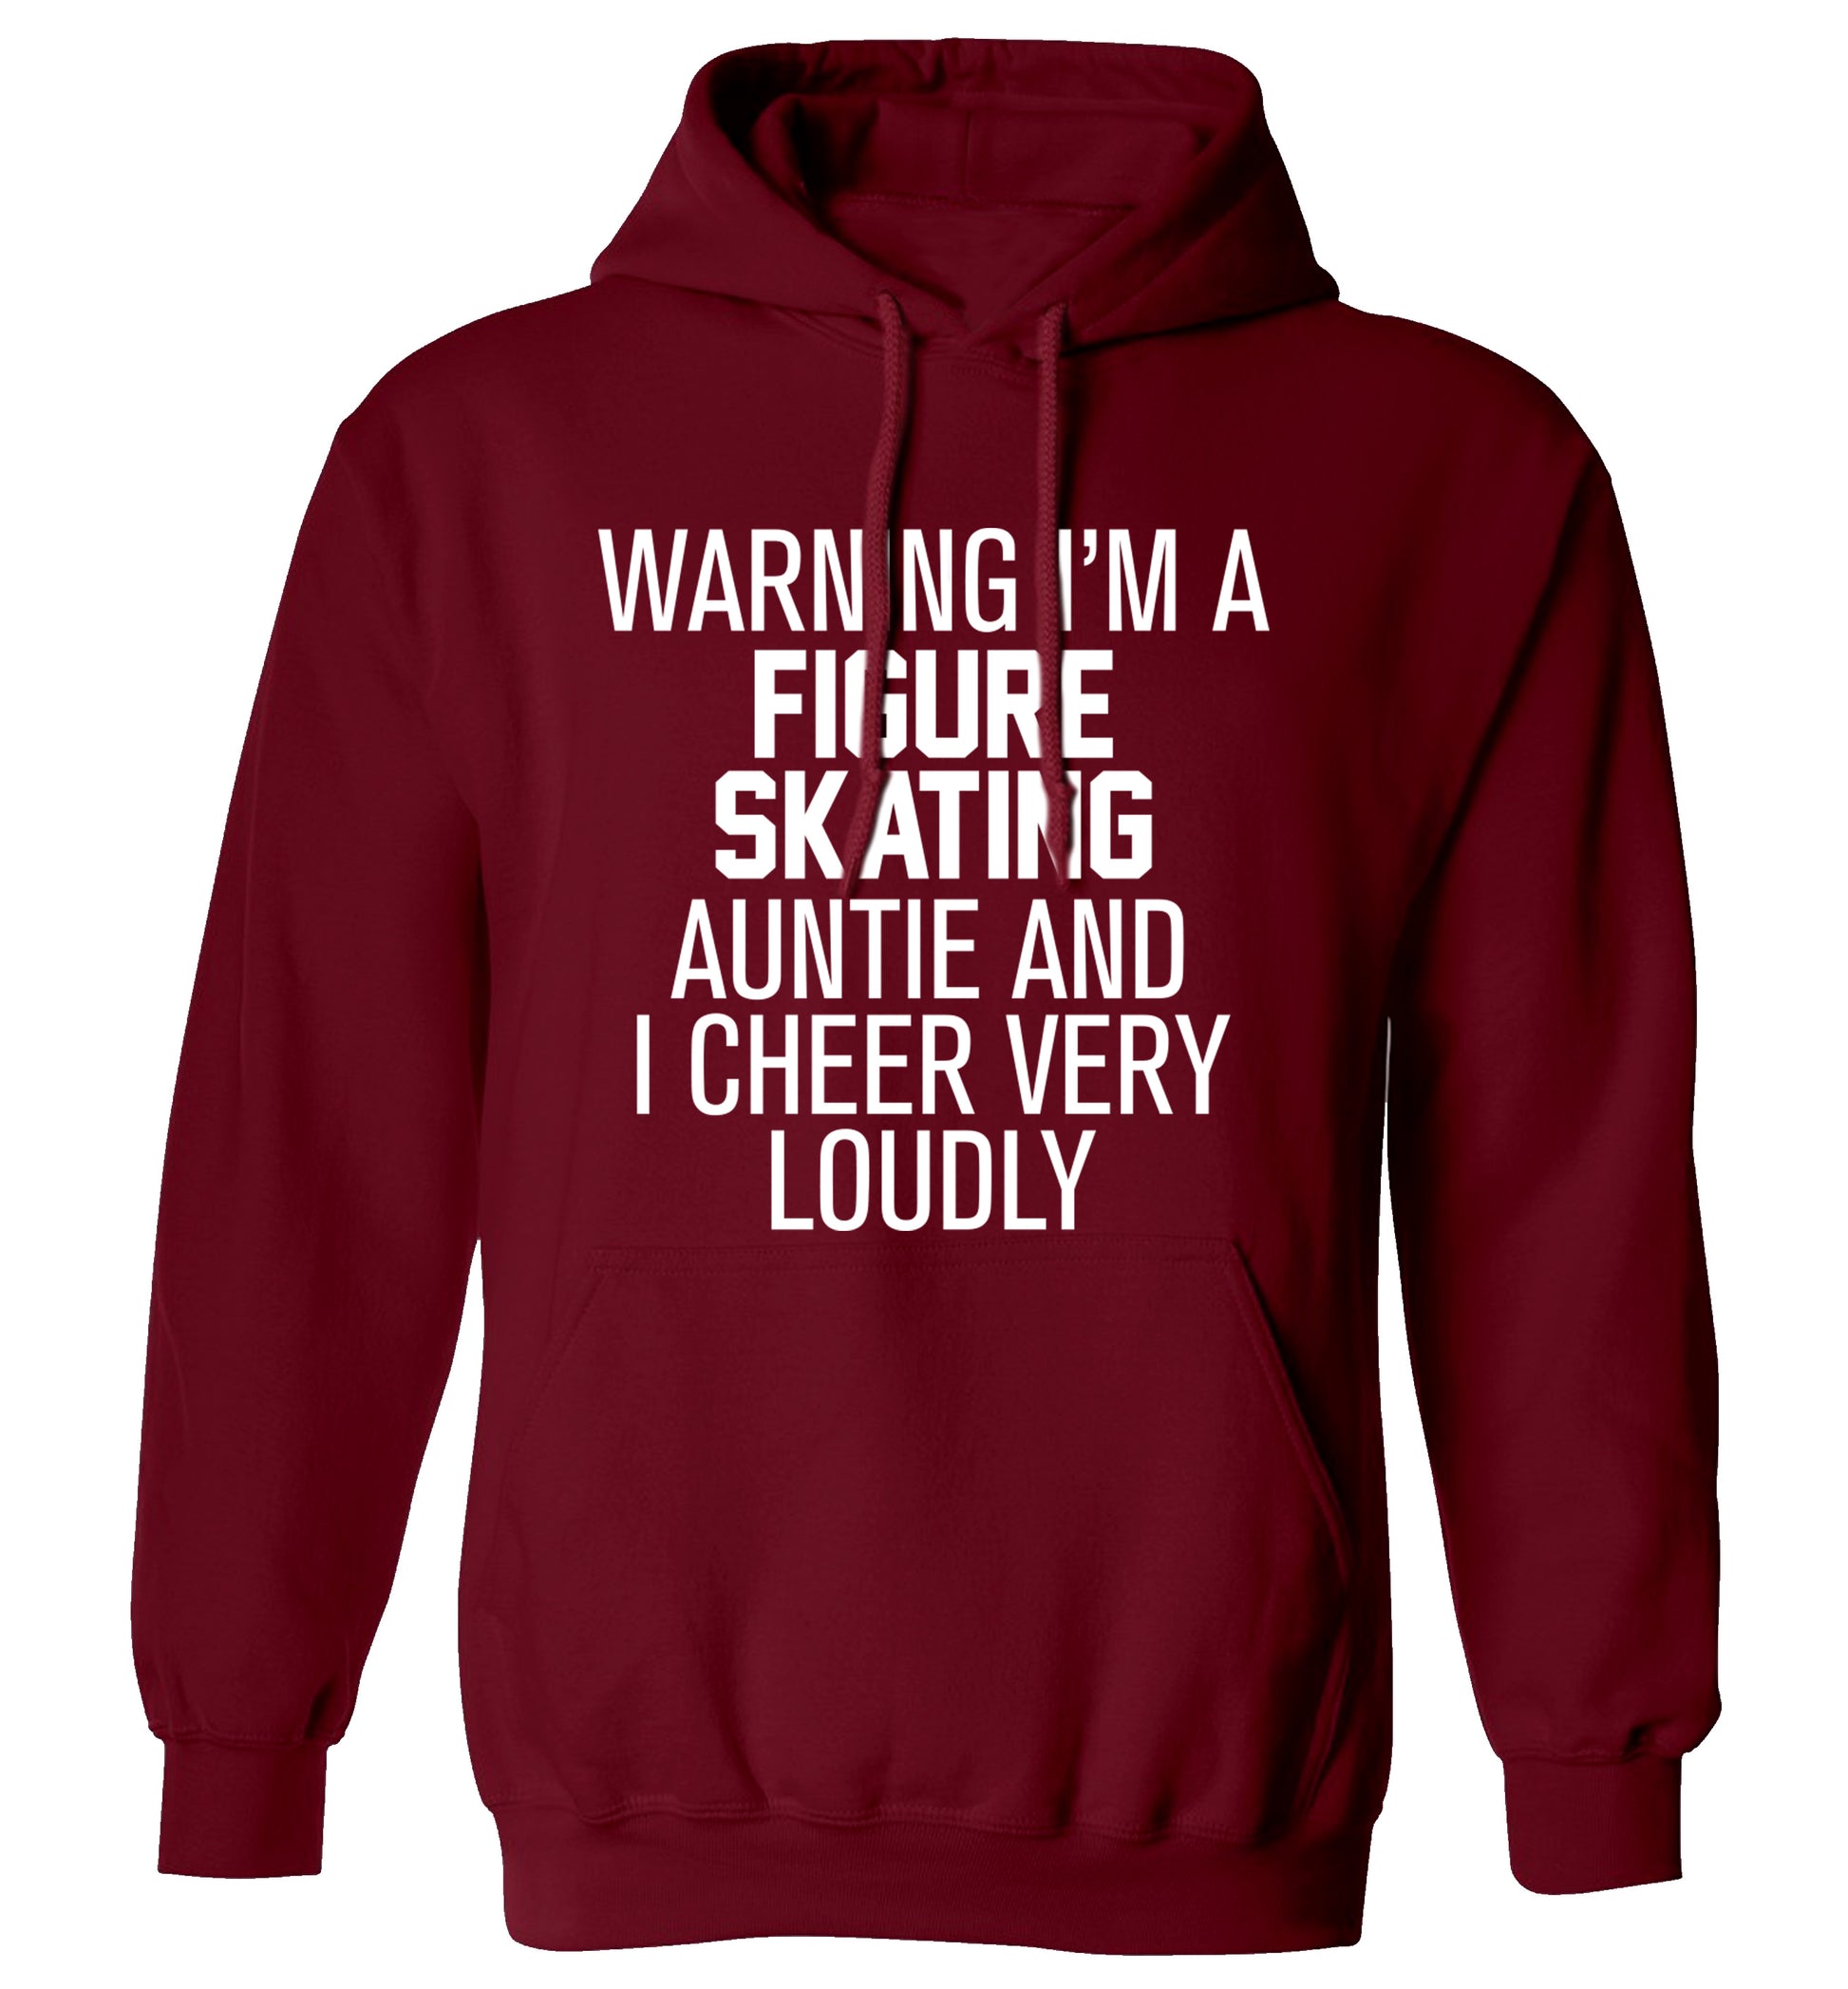 Warning I'm a figure skating auntie and I cheer very loudly adults unisexmaroon hoodie 2XL